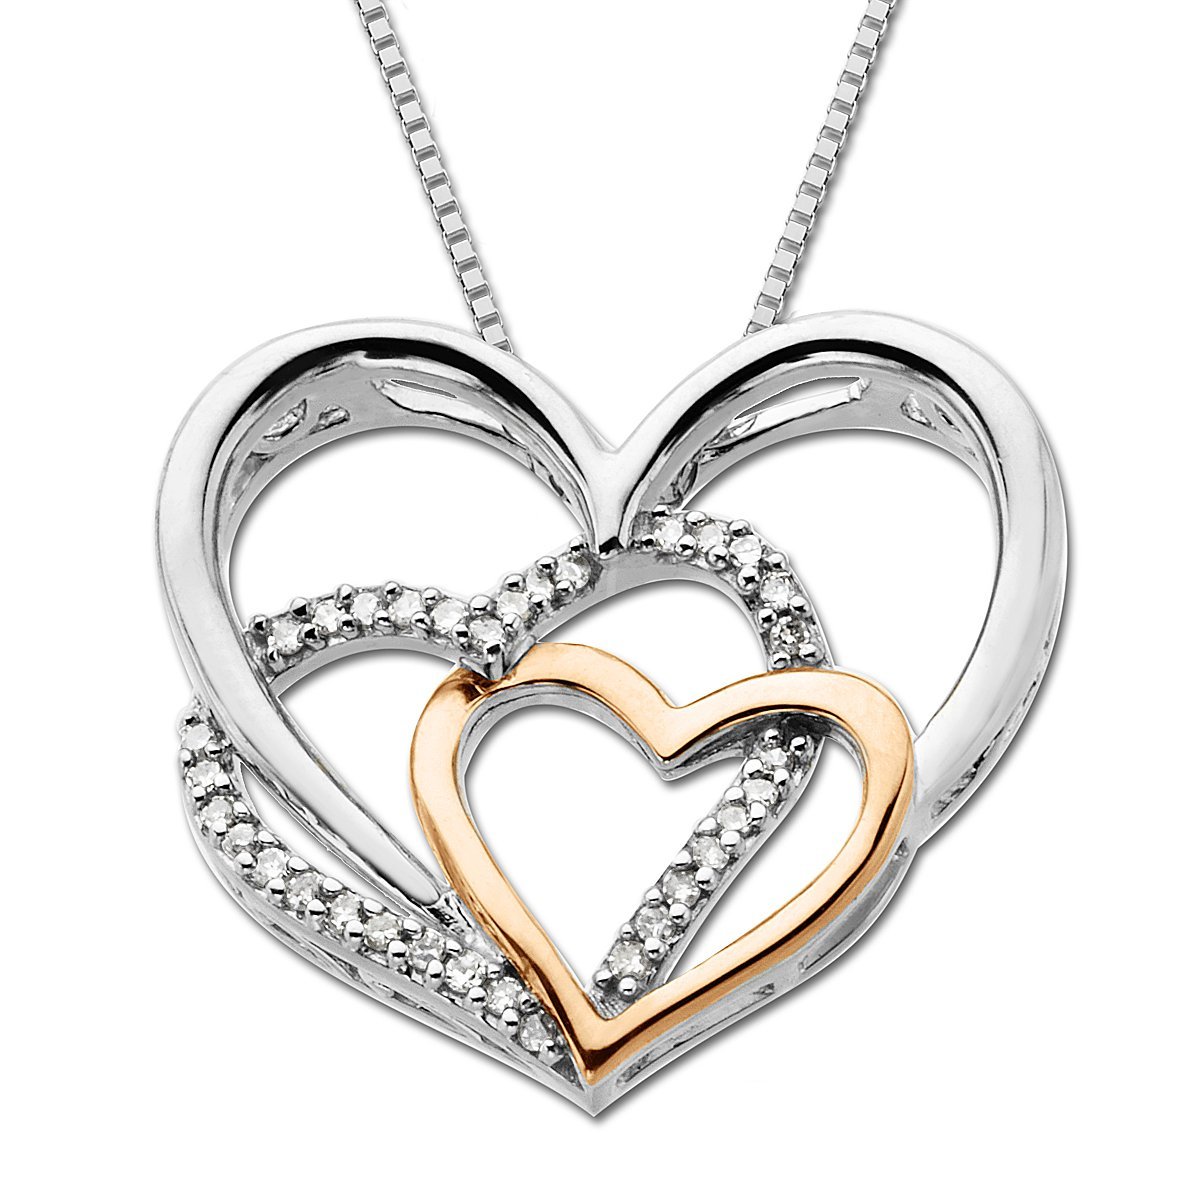 Displaying Images For - Gold Heart Pendant Necklace...